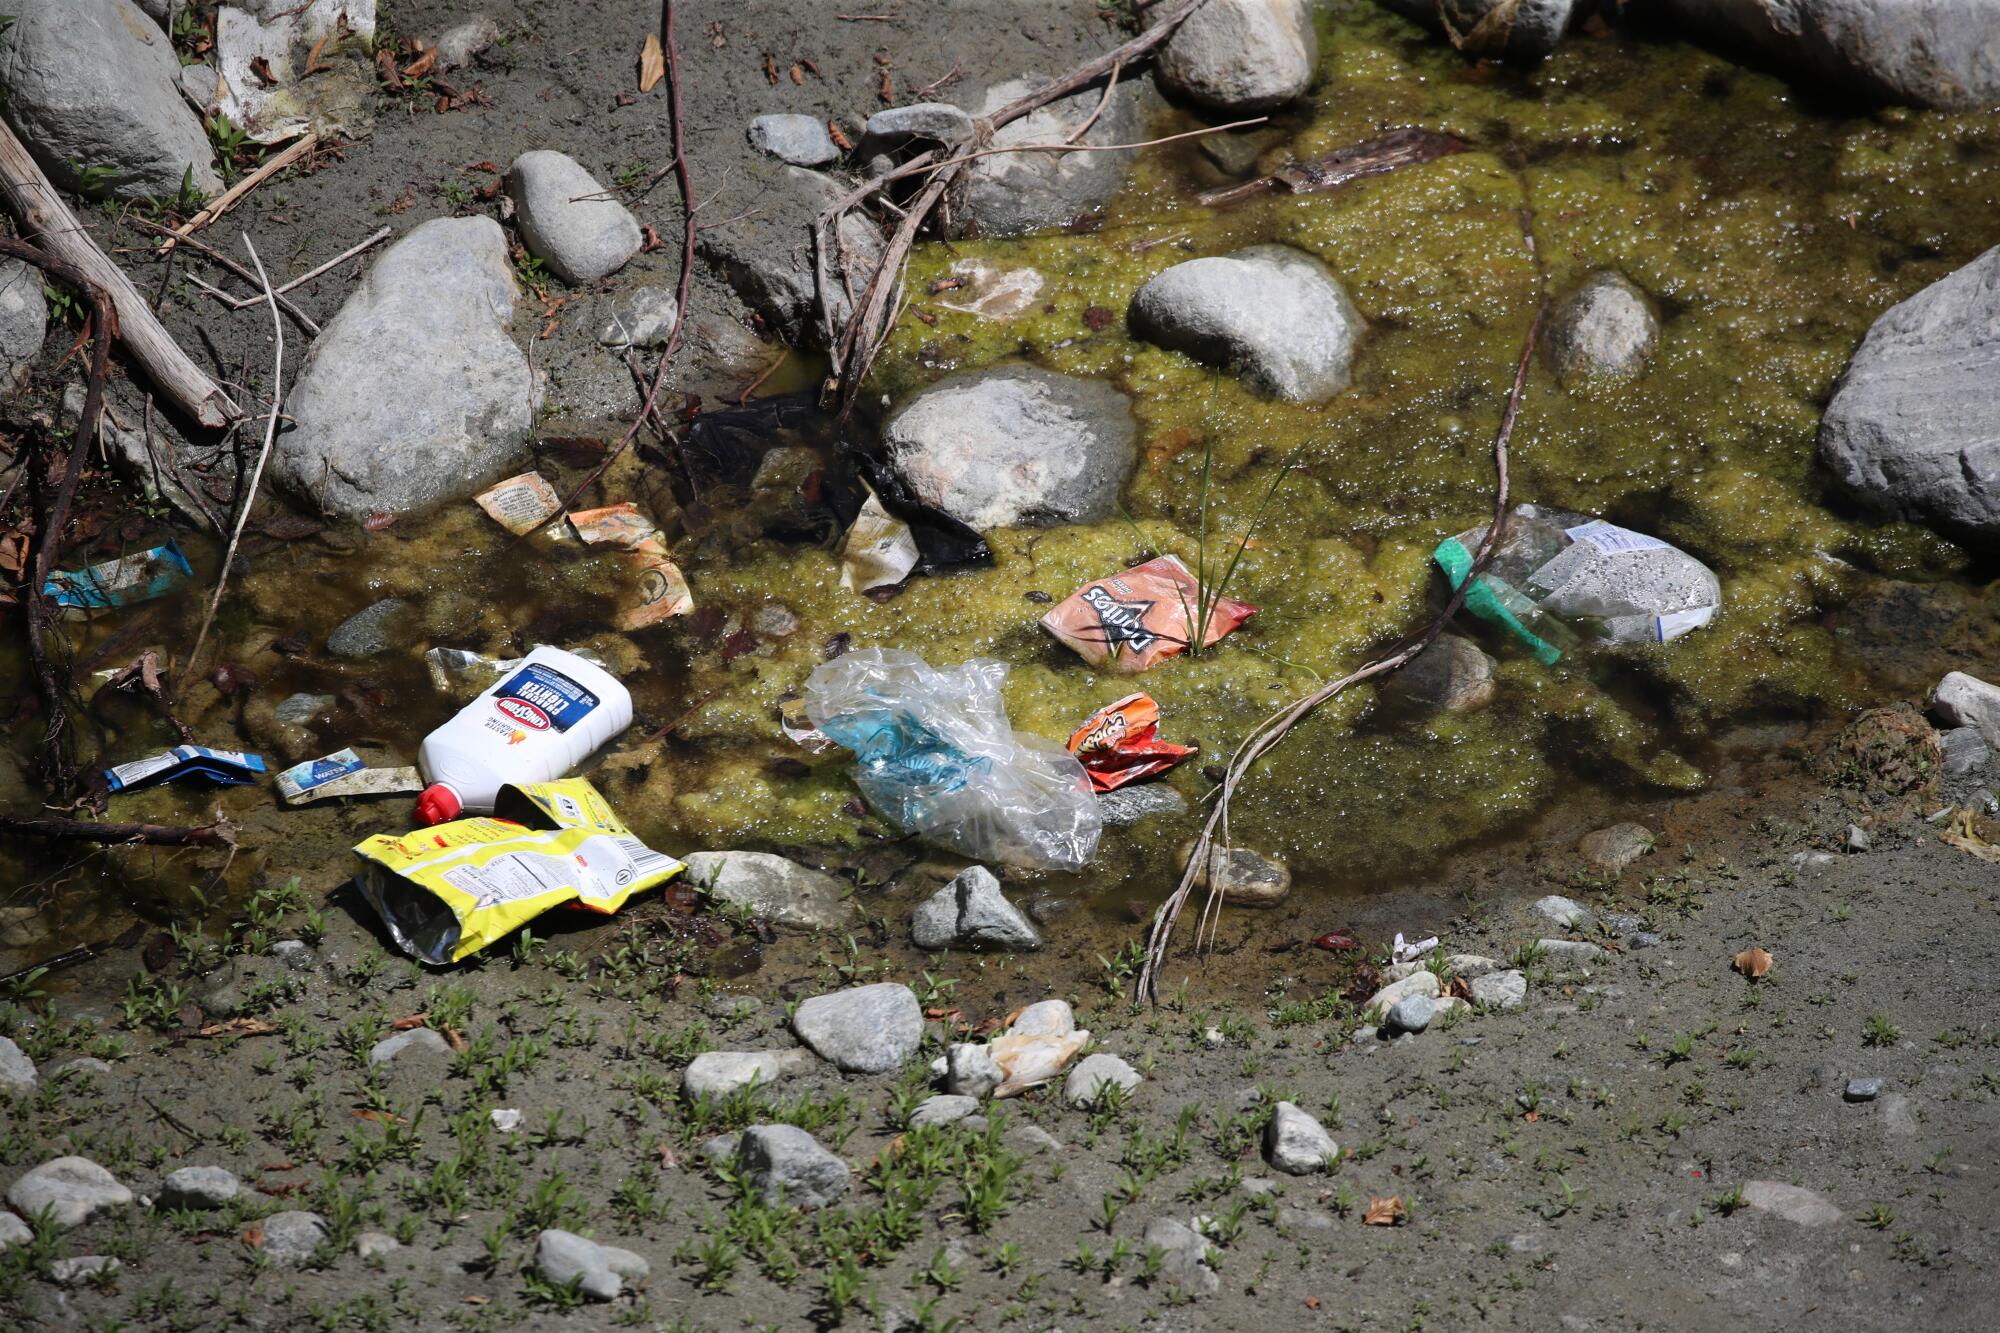 Trash litters the East Fork of the San Gabriel River in the San Gabriel Mountains National Monument